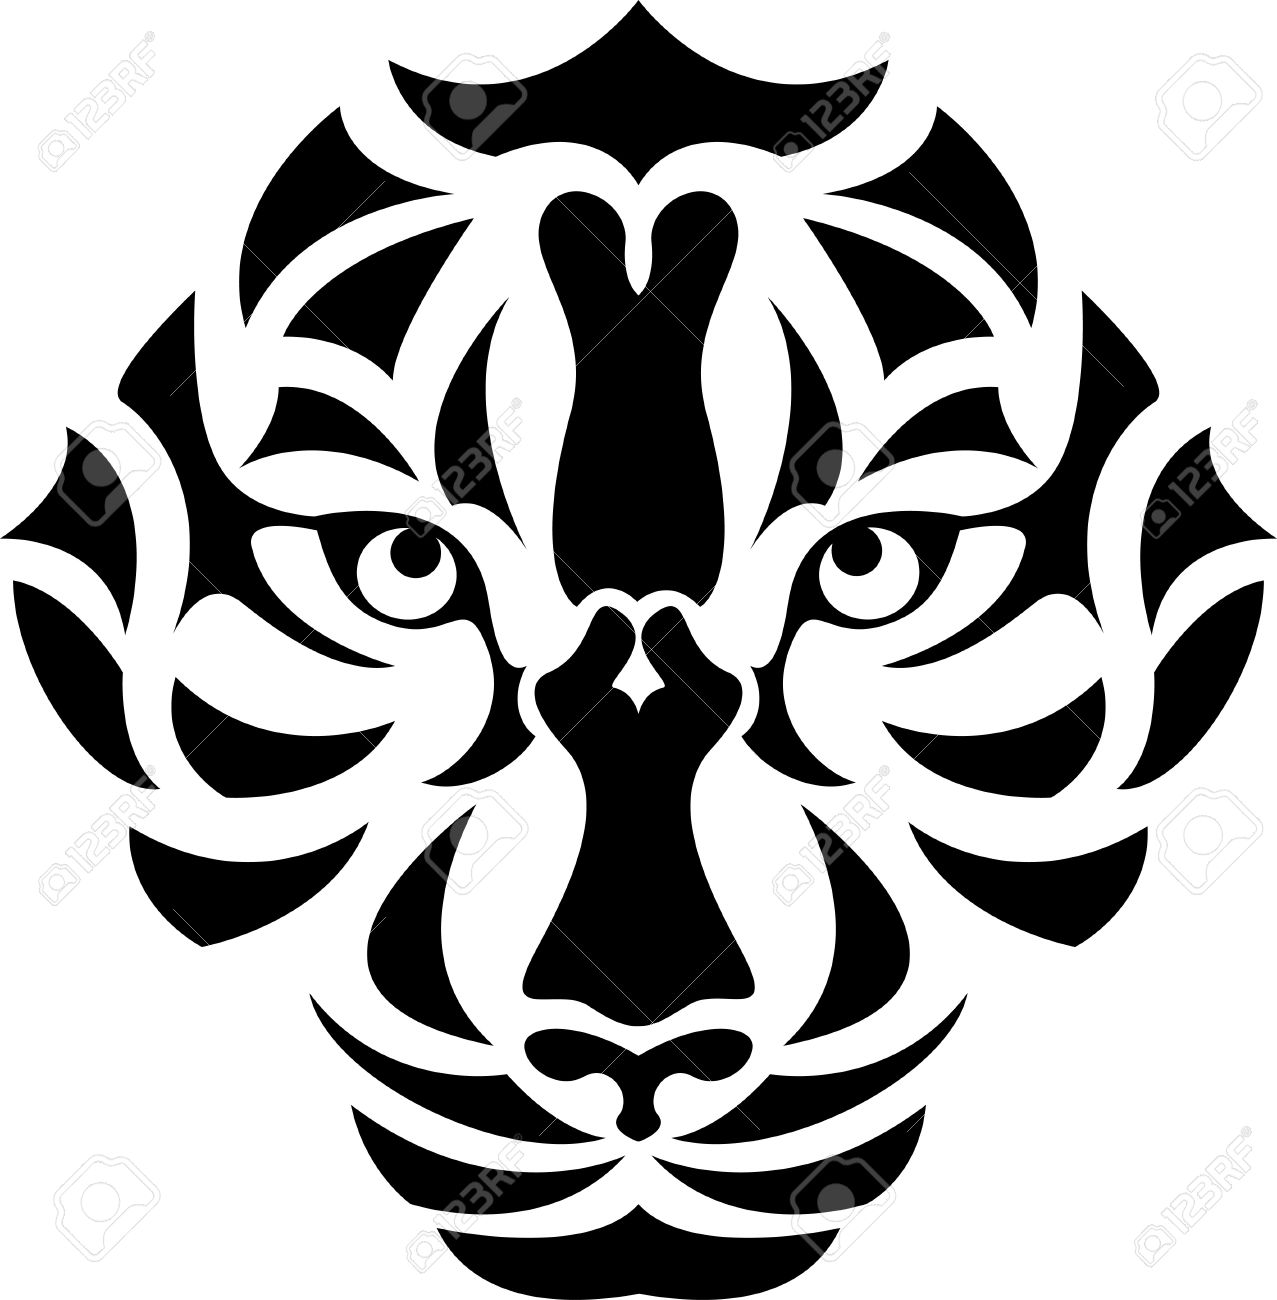 24,871 Tiger Stock Vector Illustration And Royalty Free Tiger Clipart.